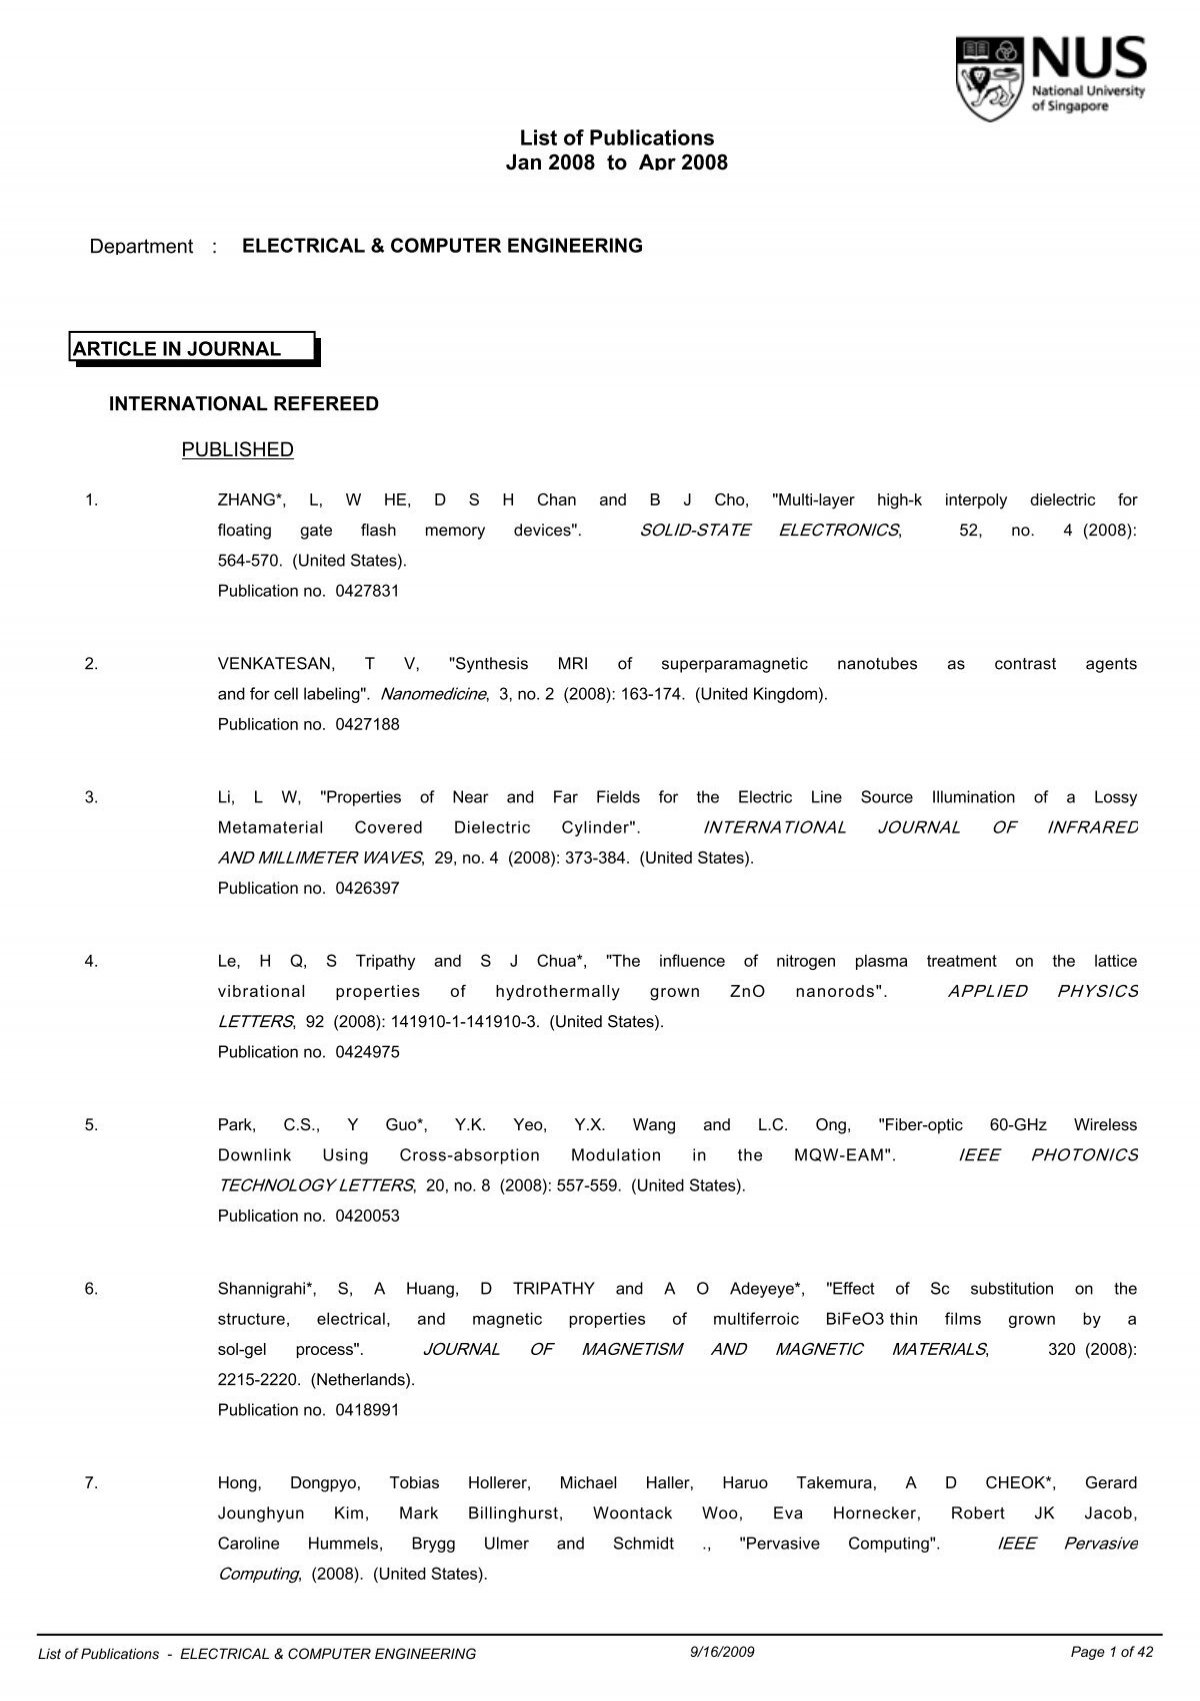 List of Publications - Department of Electrical and Computer 